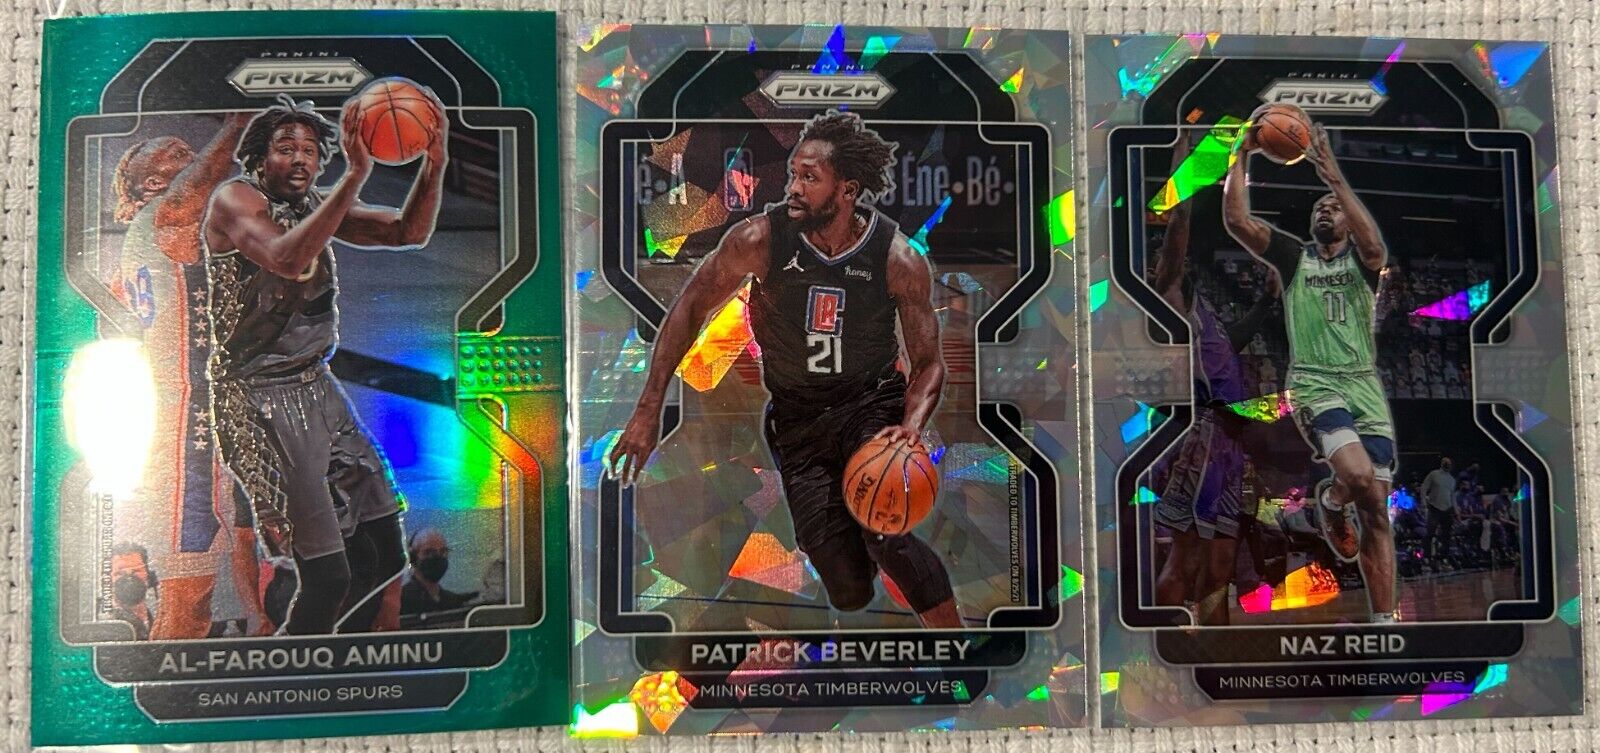 2021-22 Panini prizm NBA Beverley/Aminu/Naz Reid color parallel lot of 3 cards